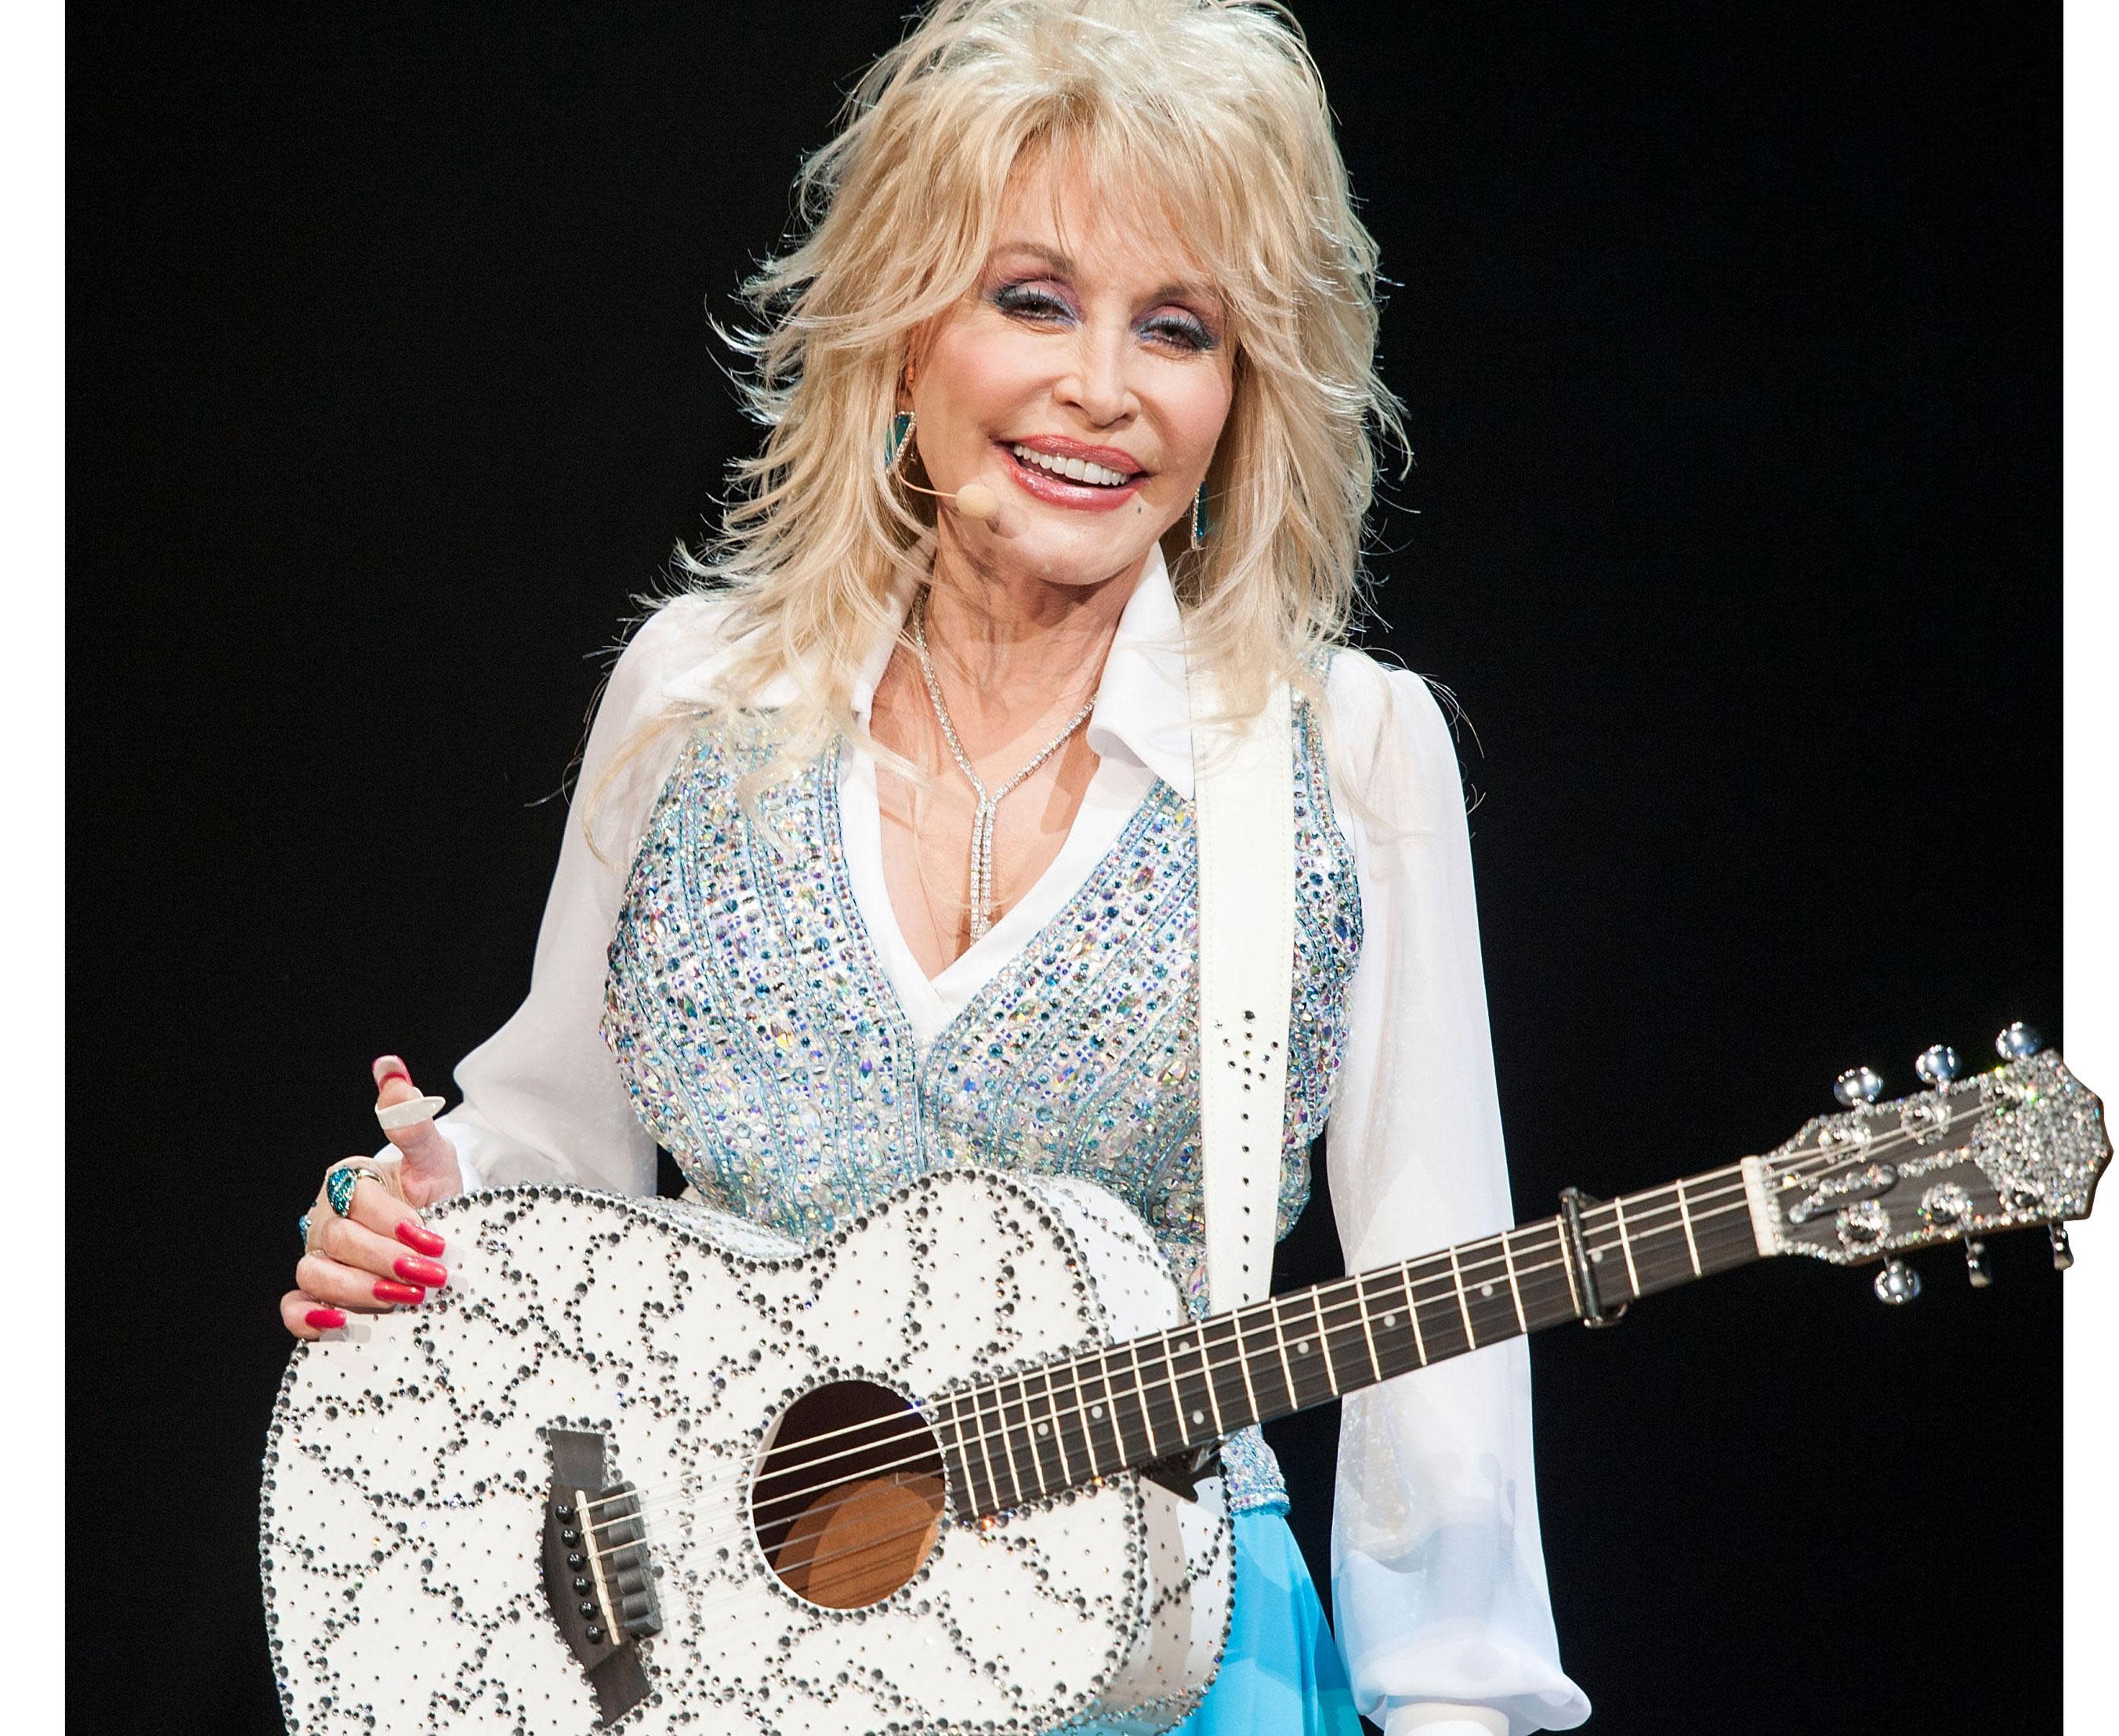 Dolly Parton on Her Iconic Wigs: 'My Husband Always Says I Look Like a Q-Tip'2704 x 2215